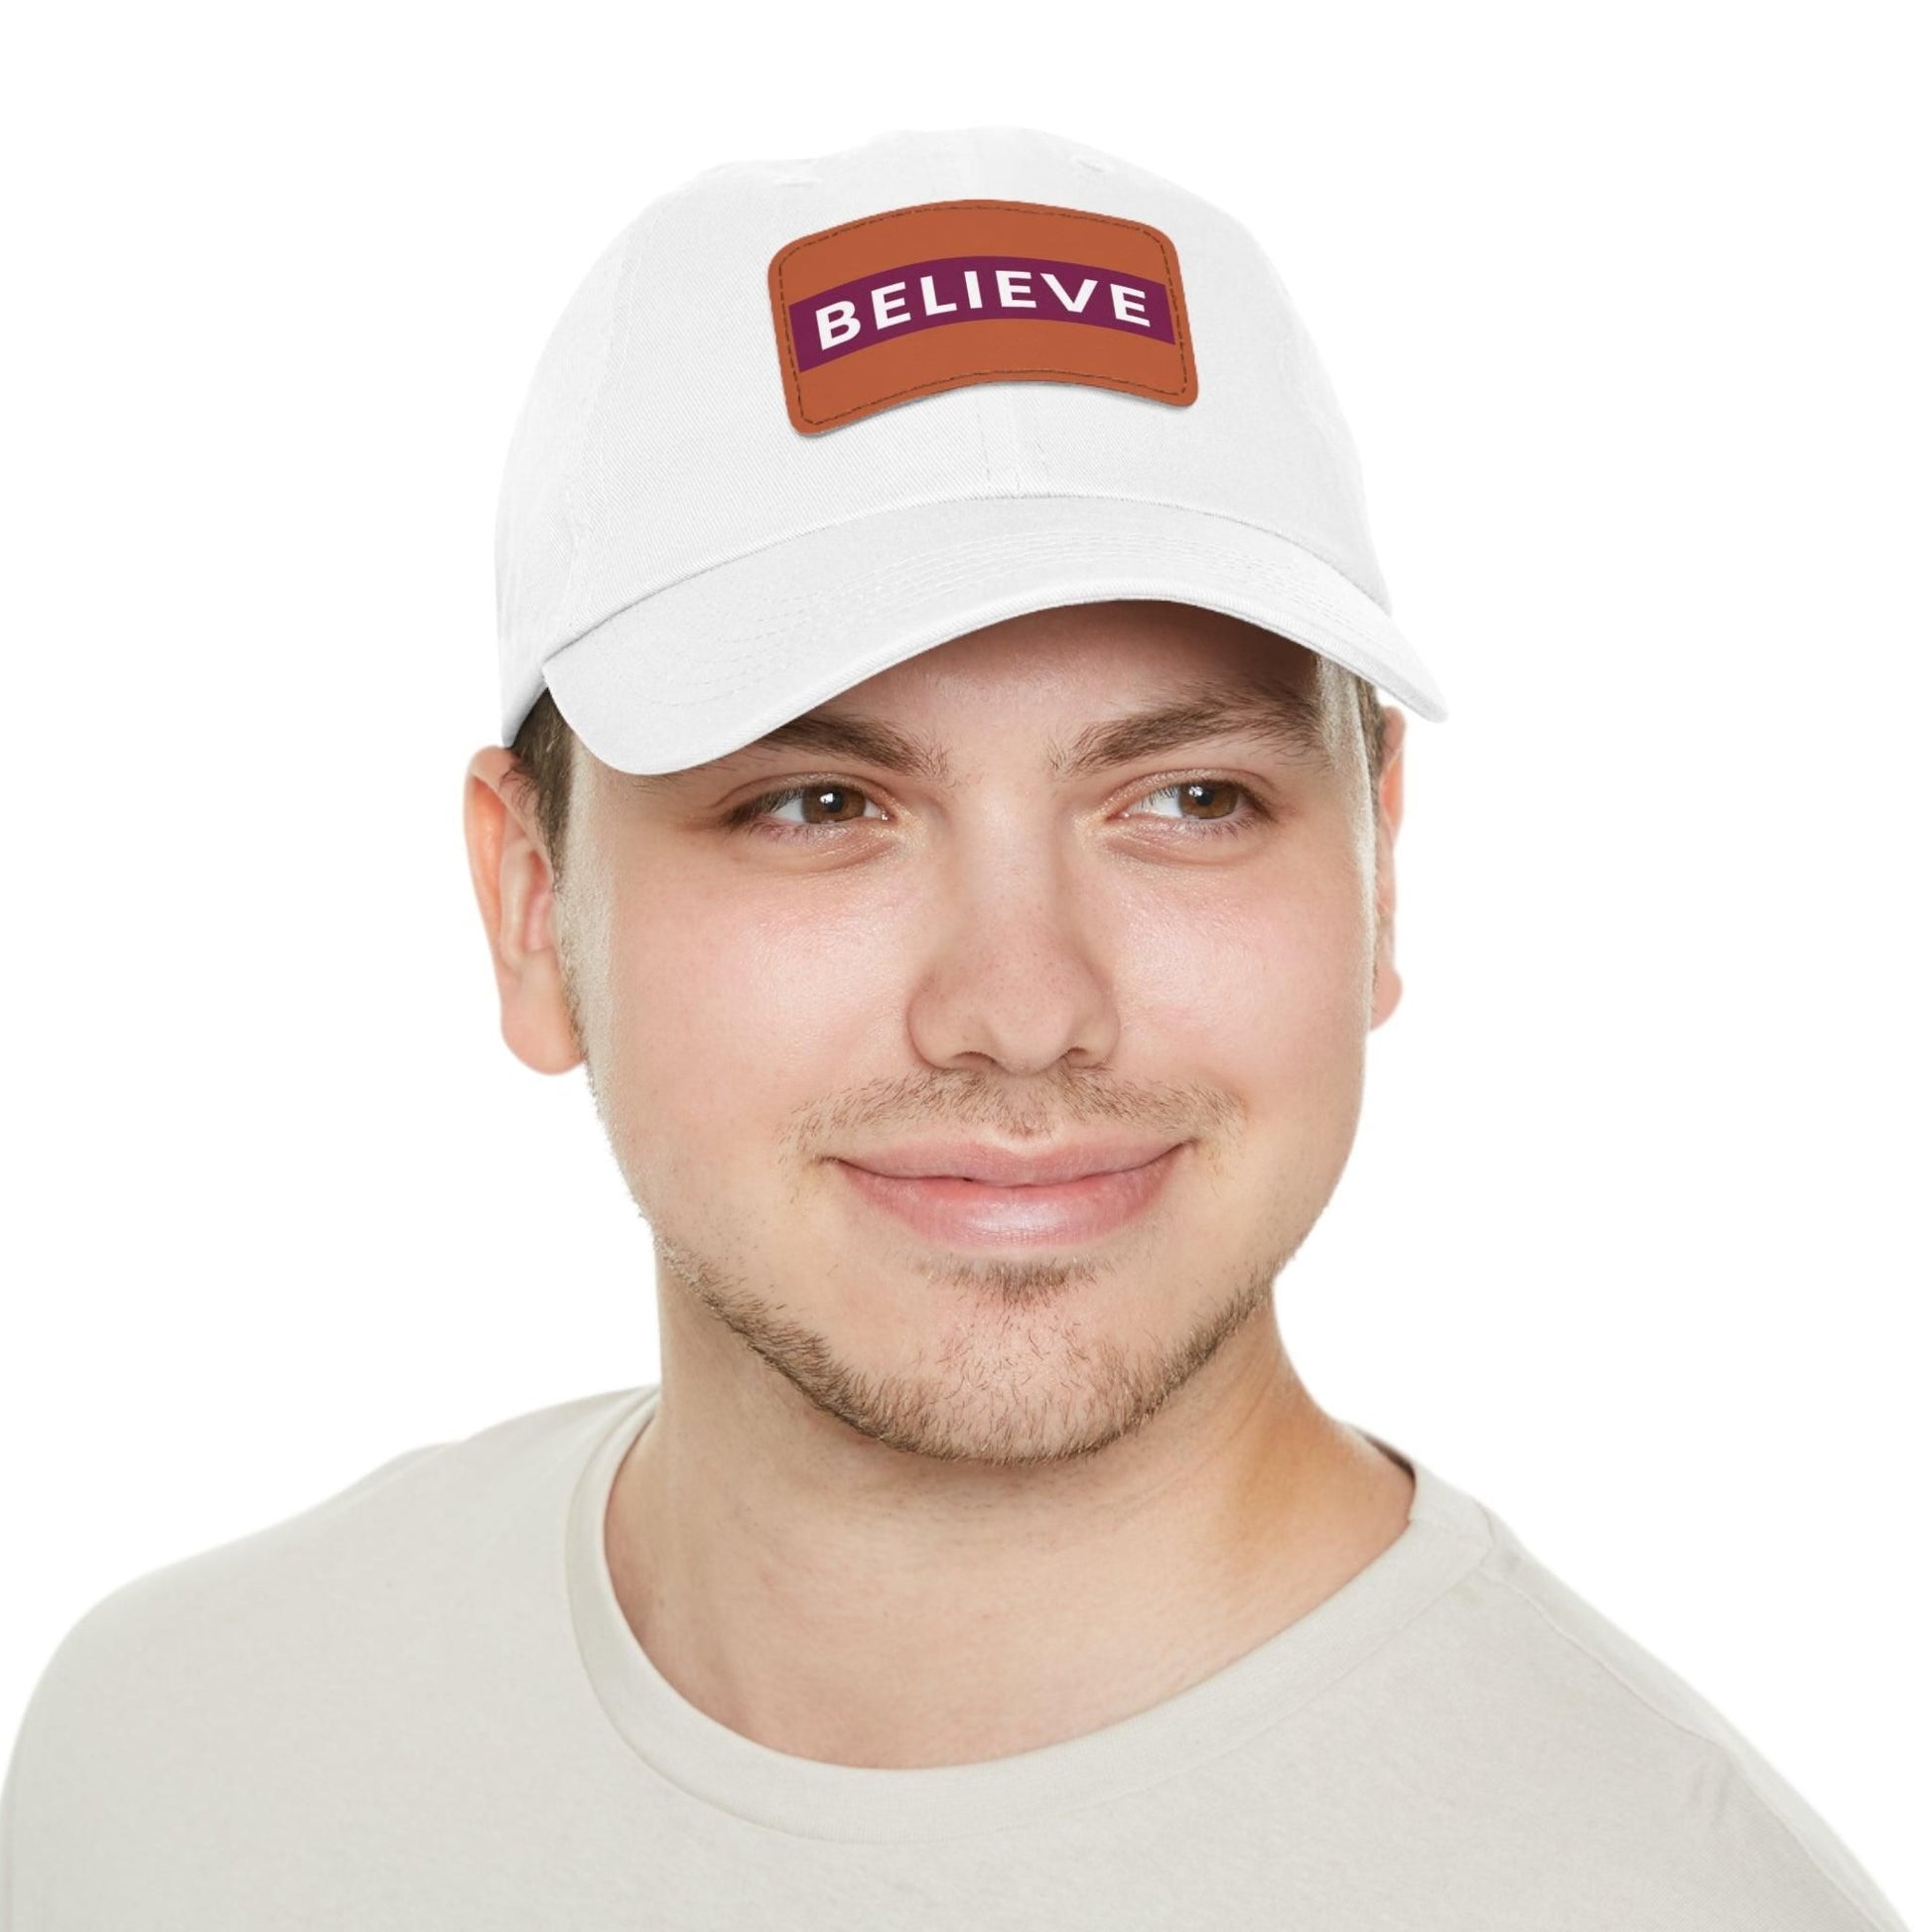 Believe Baseball Hat with Leather Patch Cap White / Light Brown patch Rectangle One size